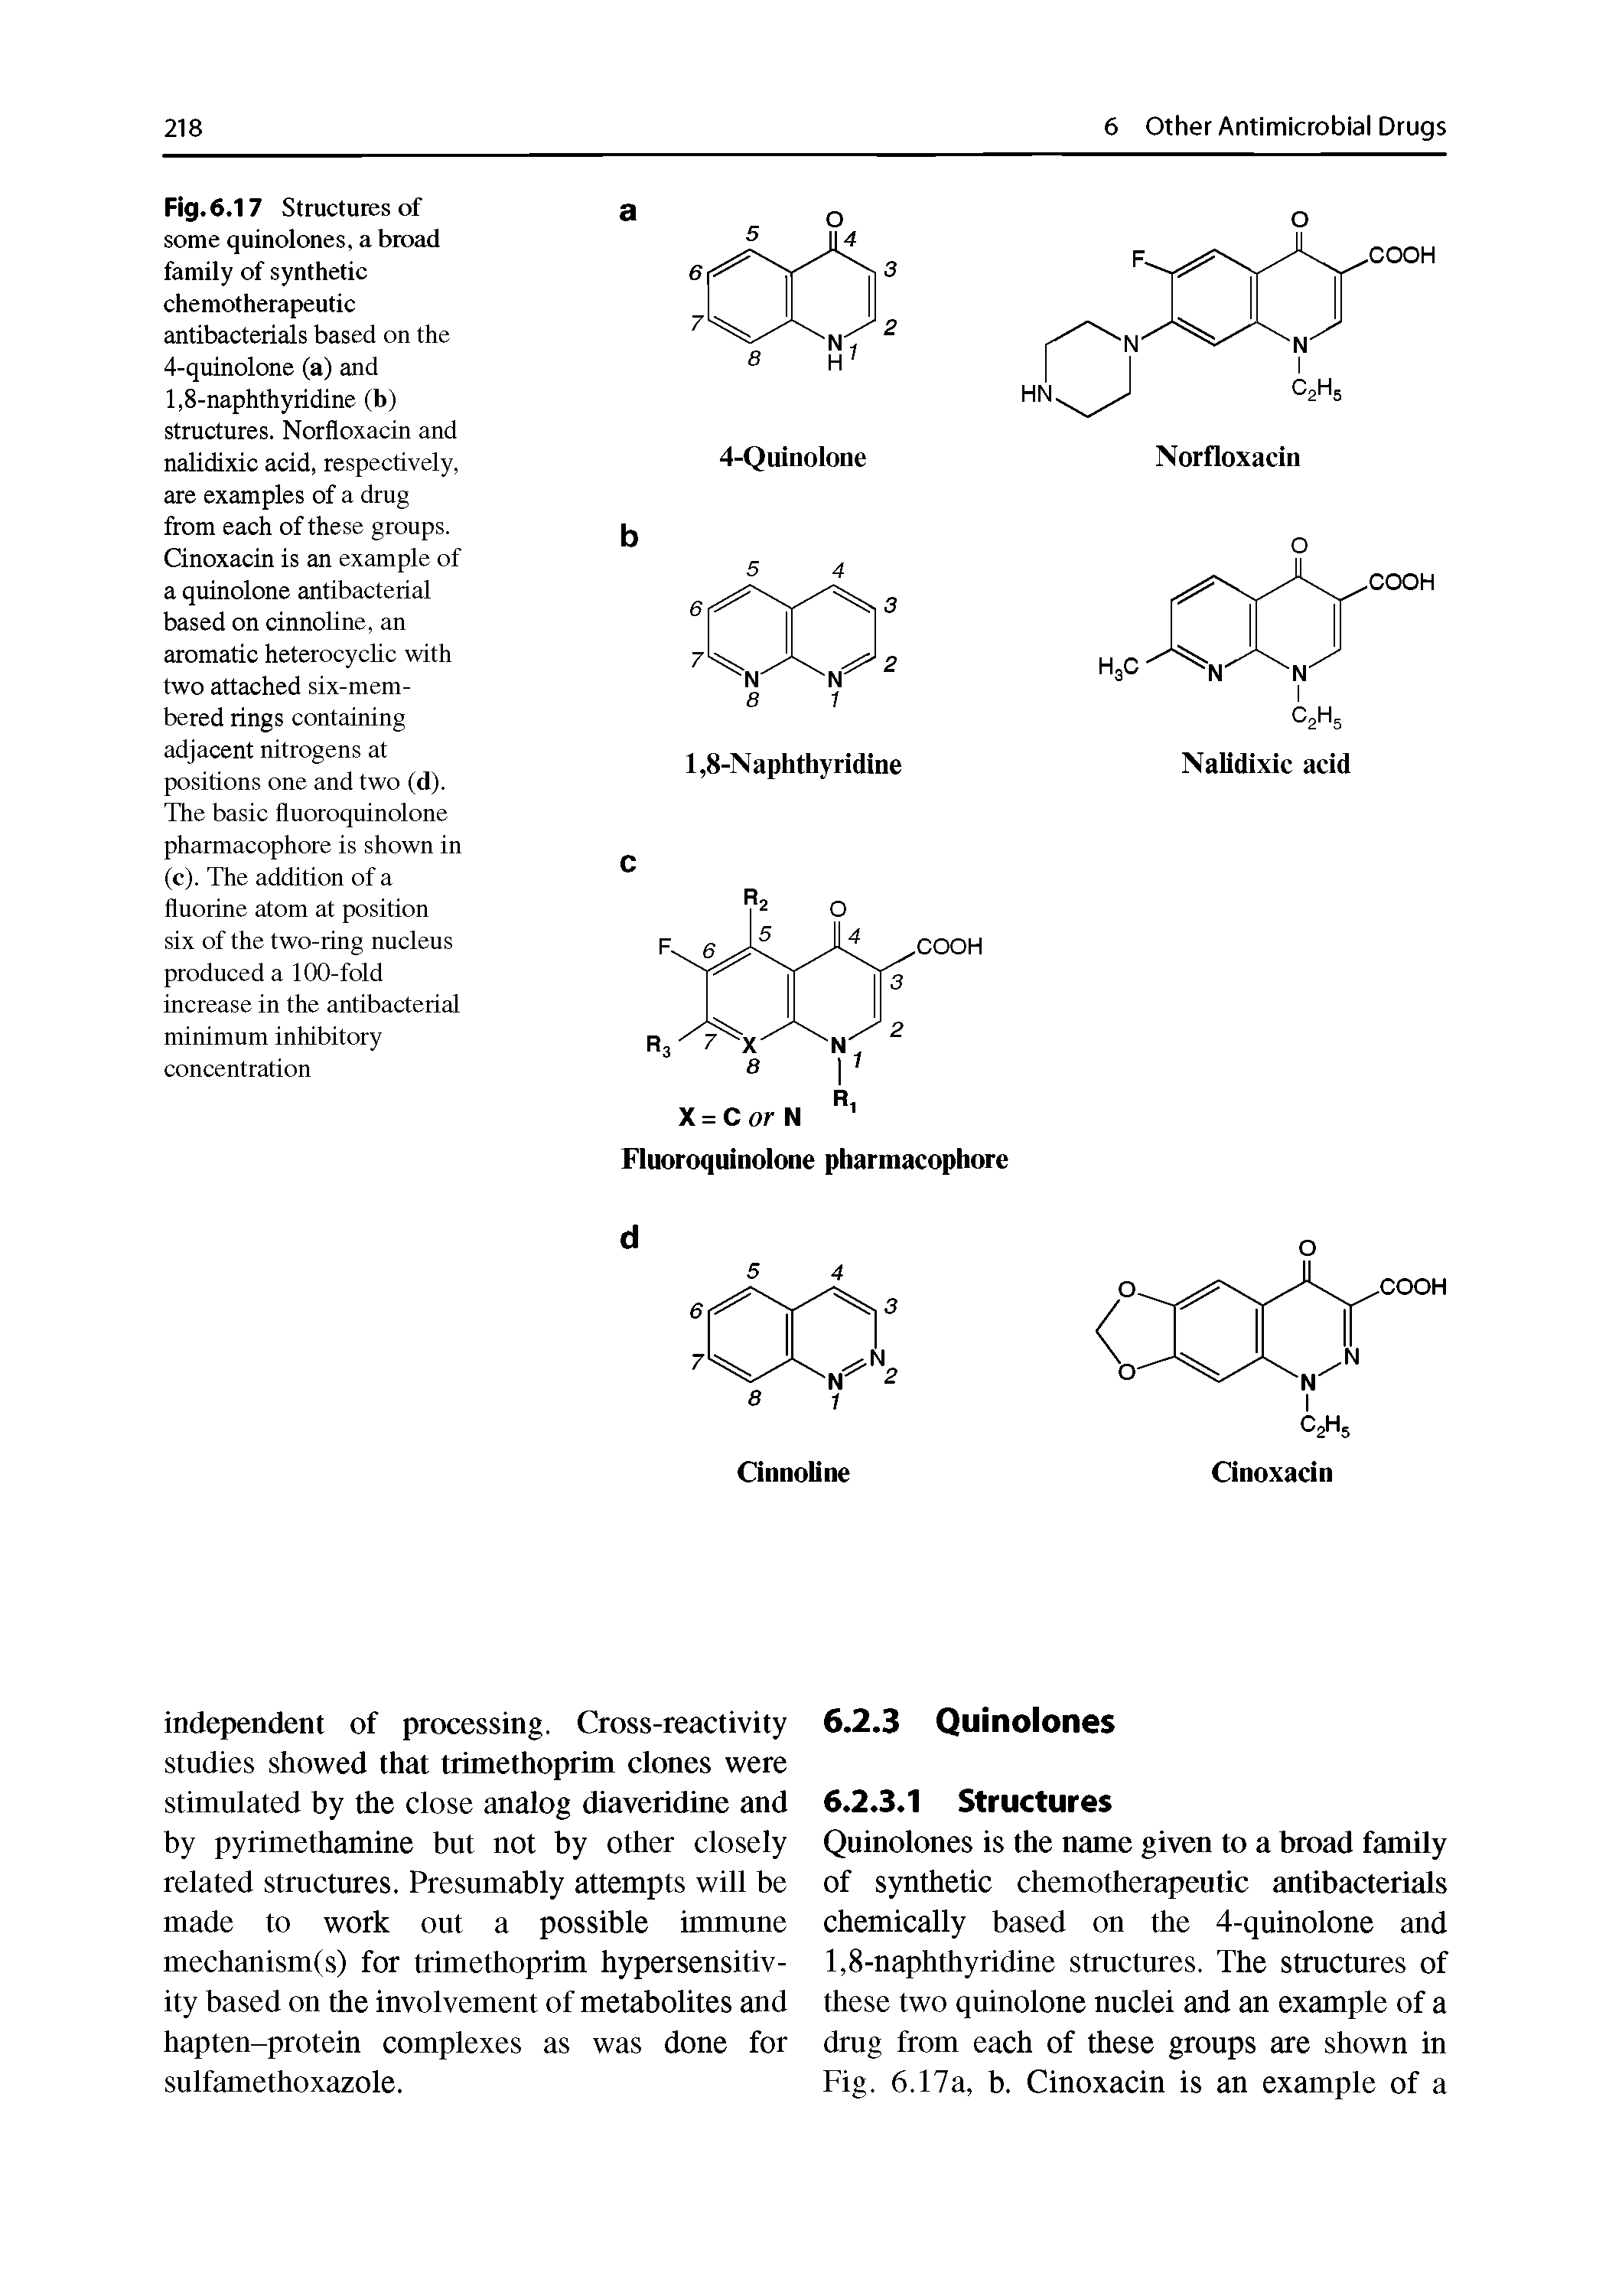 Fig. 6.17 Structures of some quinolones, a broad family of synthetic chemotherapeutic antibacterials based on the 4-quinolone (a) and 1,8-naphthyiidine (b) structures. Norfloxacin and nalidixic acid, respectively, are examples of a drug from each of these groups. Qnoxacin is an example of a quinolone antibacterial based on cinnoUne, an aromatic heterocyclic with two attached six-mem-bered tings containing adjacent nitrogens at positions one and two (d). The basic fluoroquinolone pharmacophore is shown in (c). The addition of a fluorine atom at position six of the two-ring nucleus produced a 100-fold increase in the antibacterial minimum inhibitory concentration...